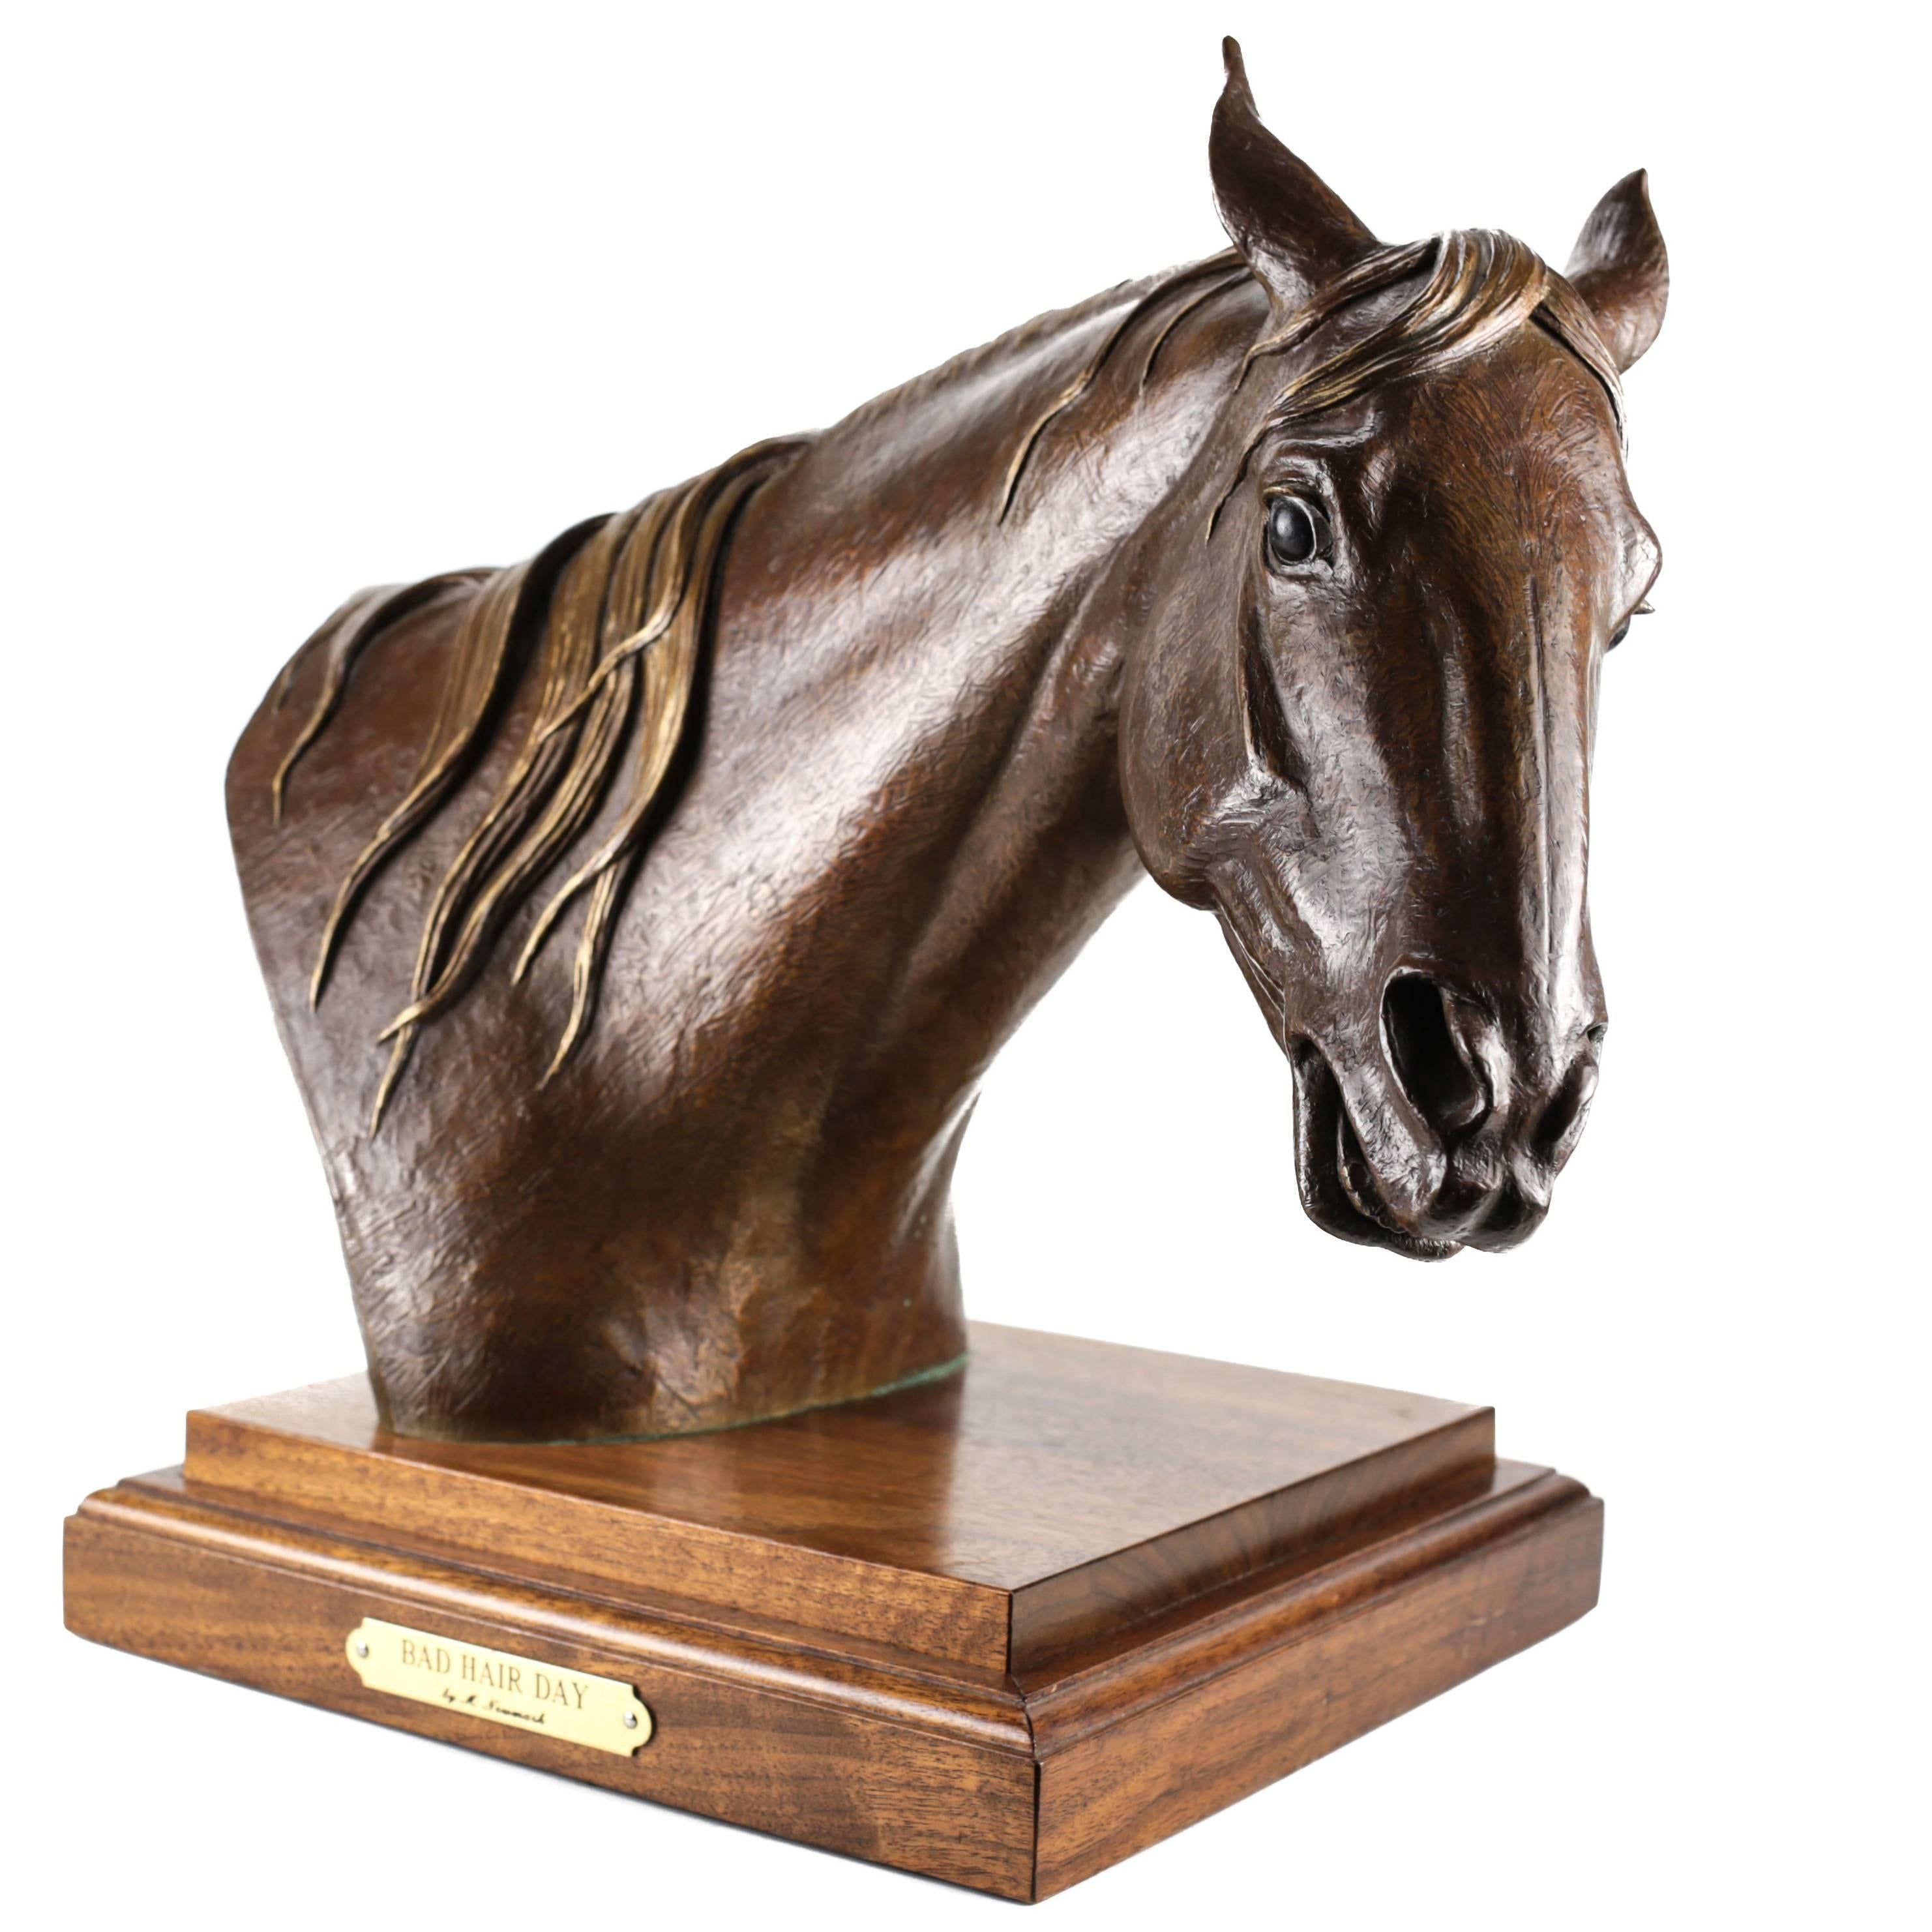 Bronze Sculpture of a Horse "Bad Hair Day" by Marilyn Newmark For Sale